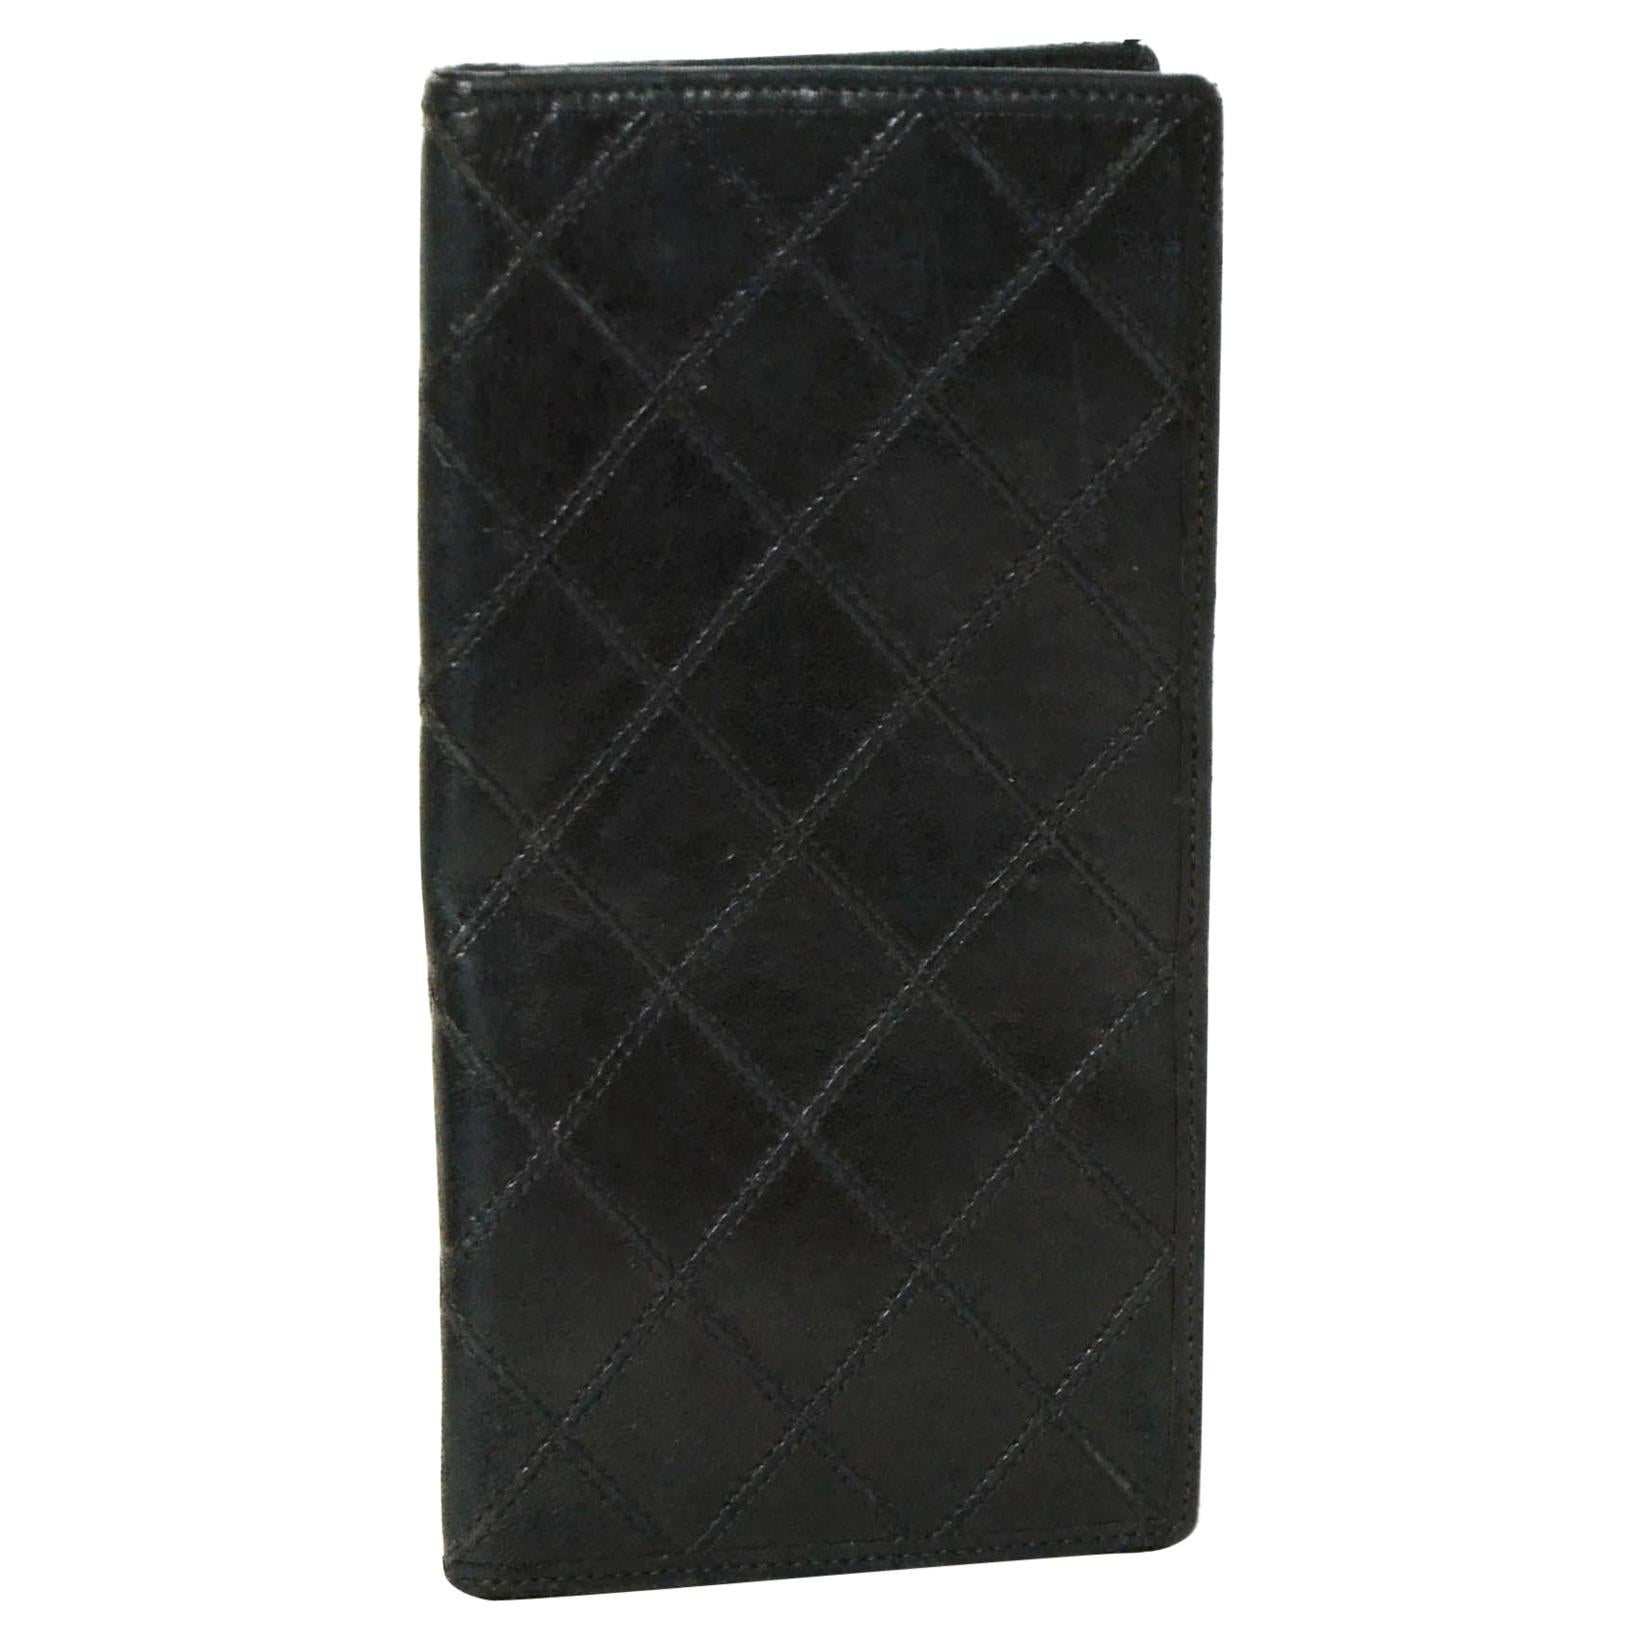 Chanel Vintage Black Leather Quilted Checkbook Cover/Wallet